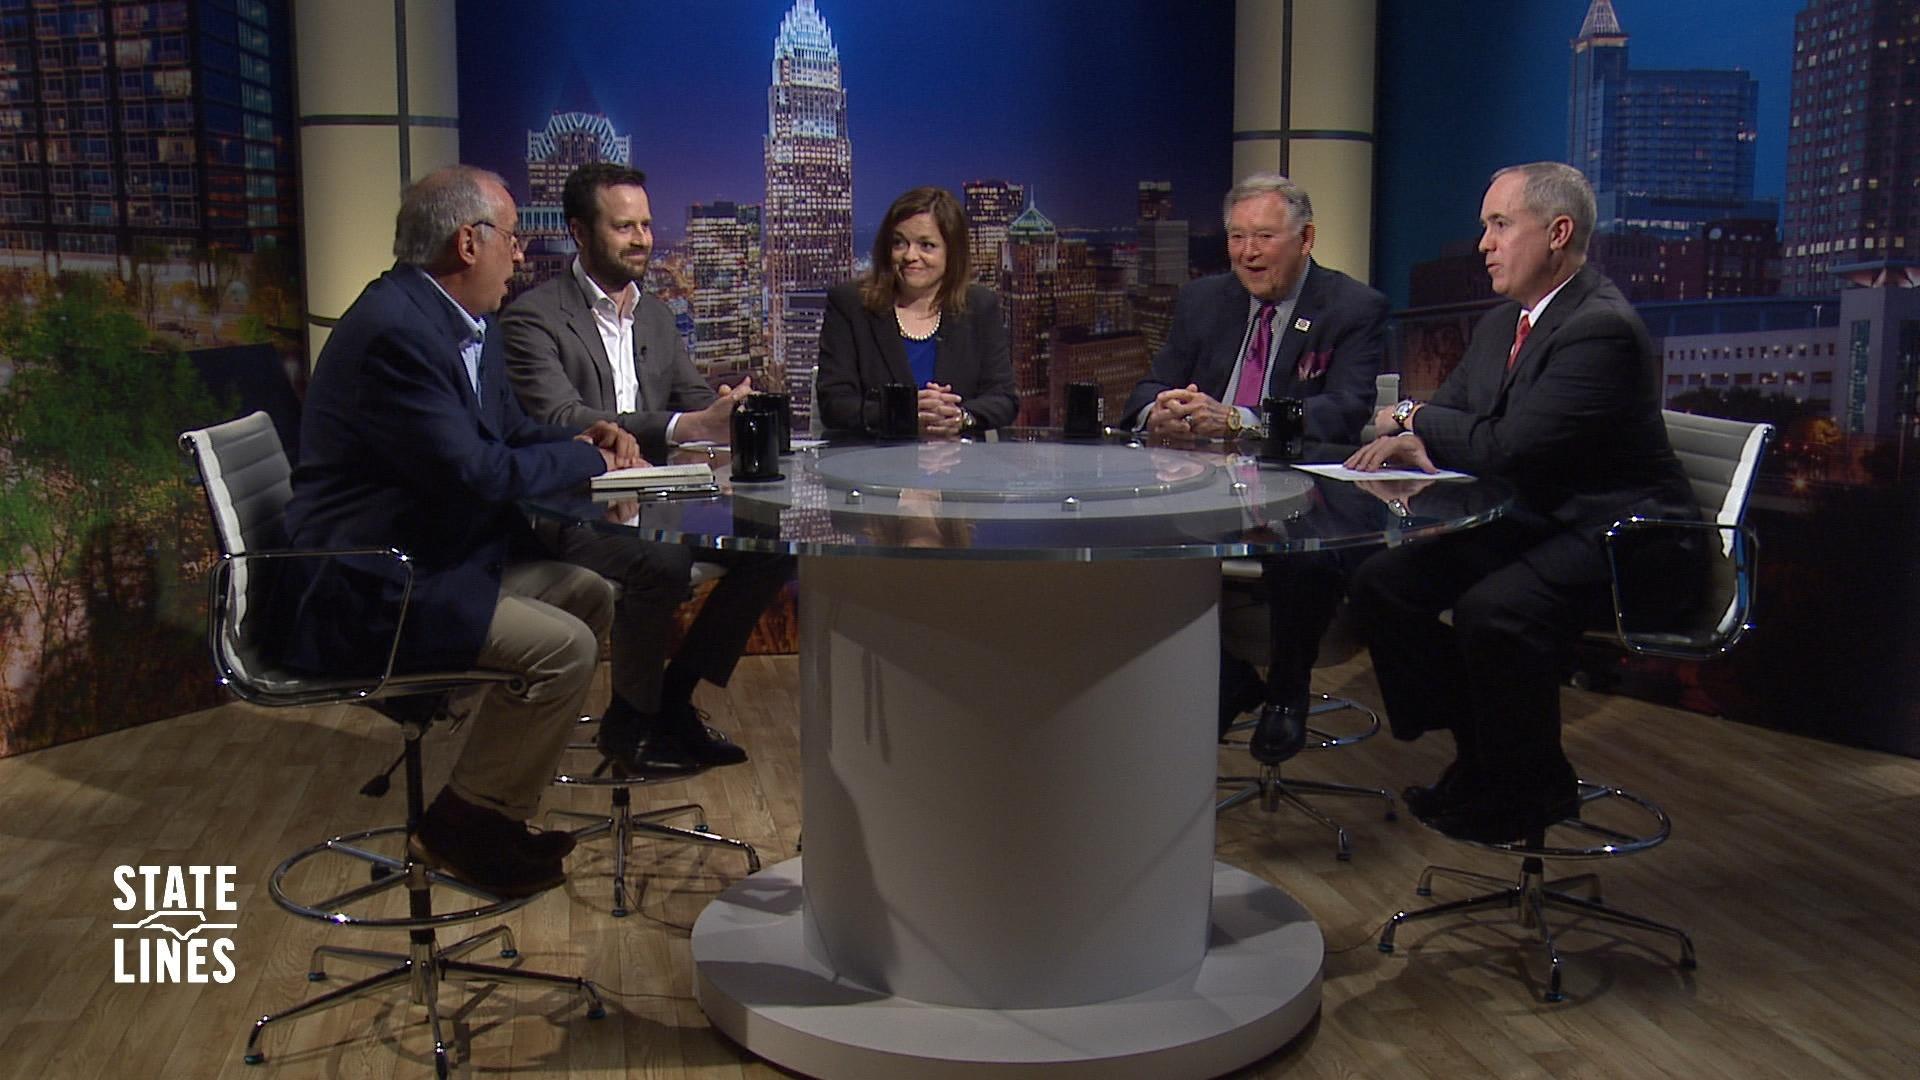 State Lines host Kelly McCullen and panelists sit at a round table on the set of State Lines.